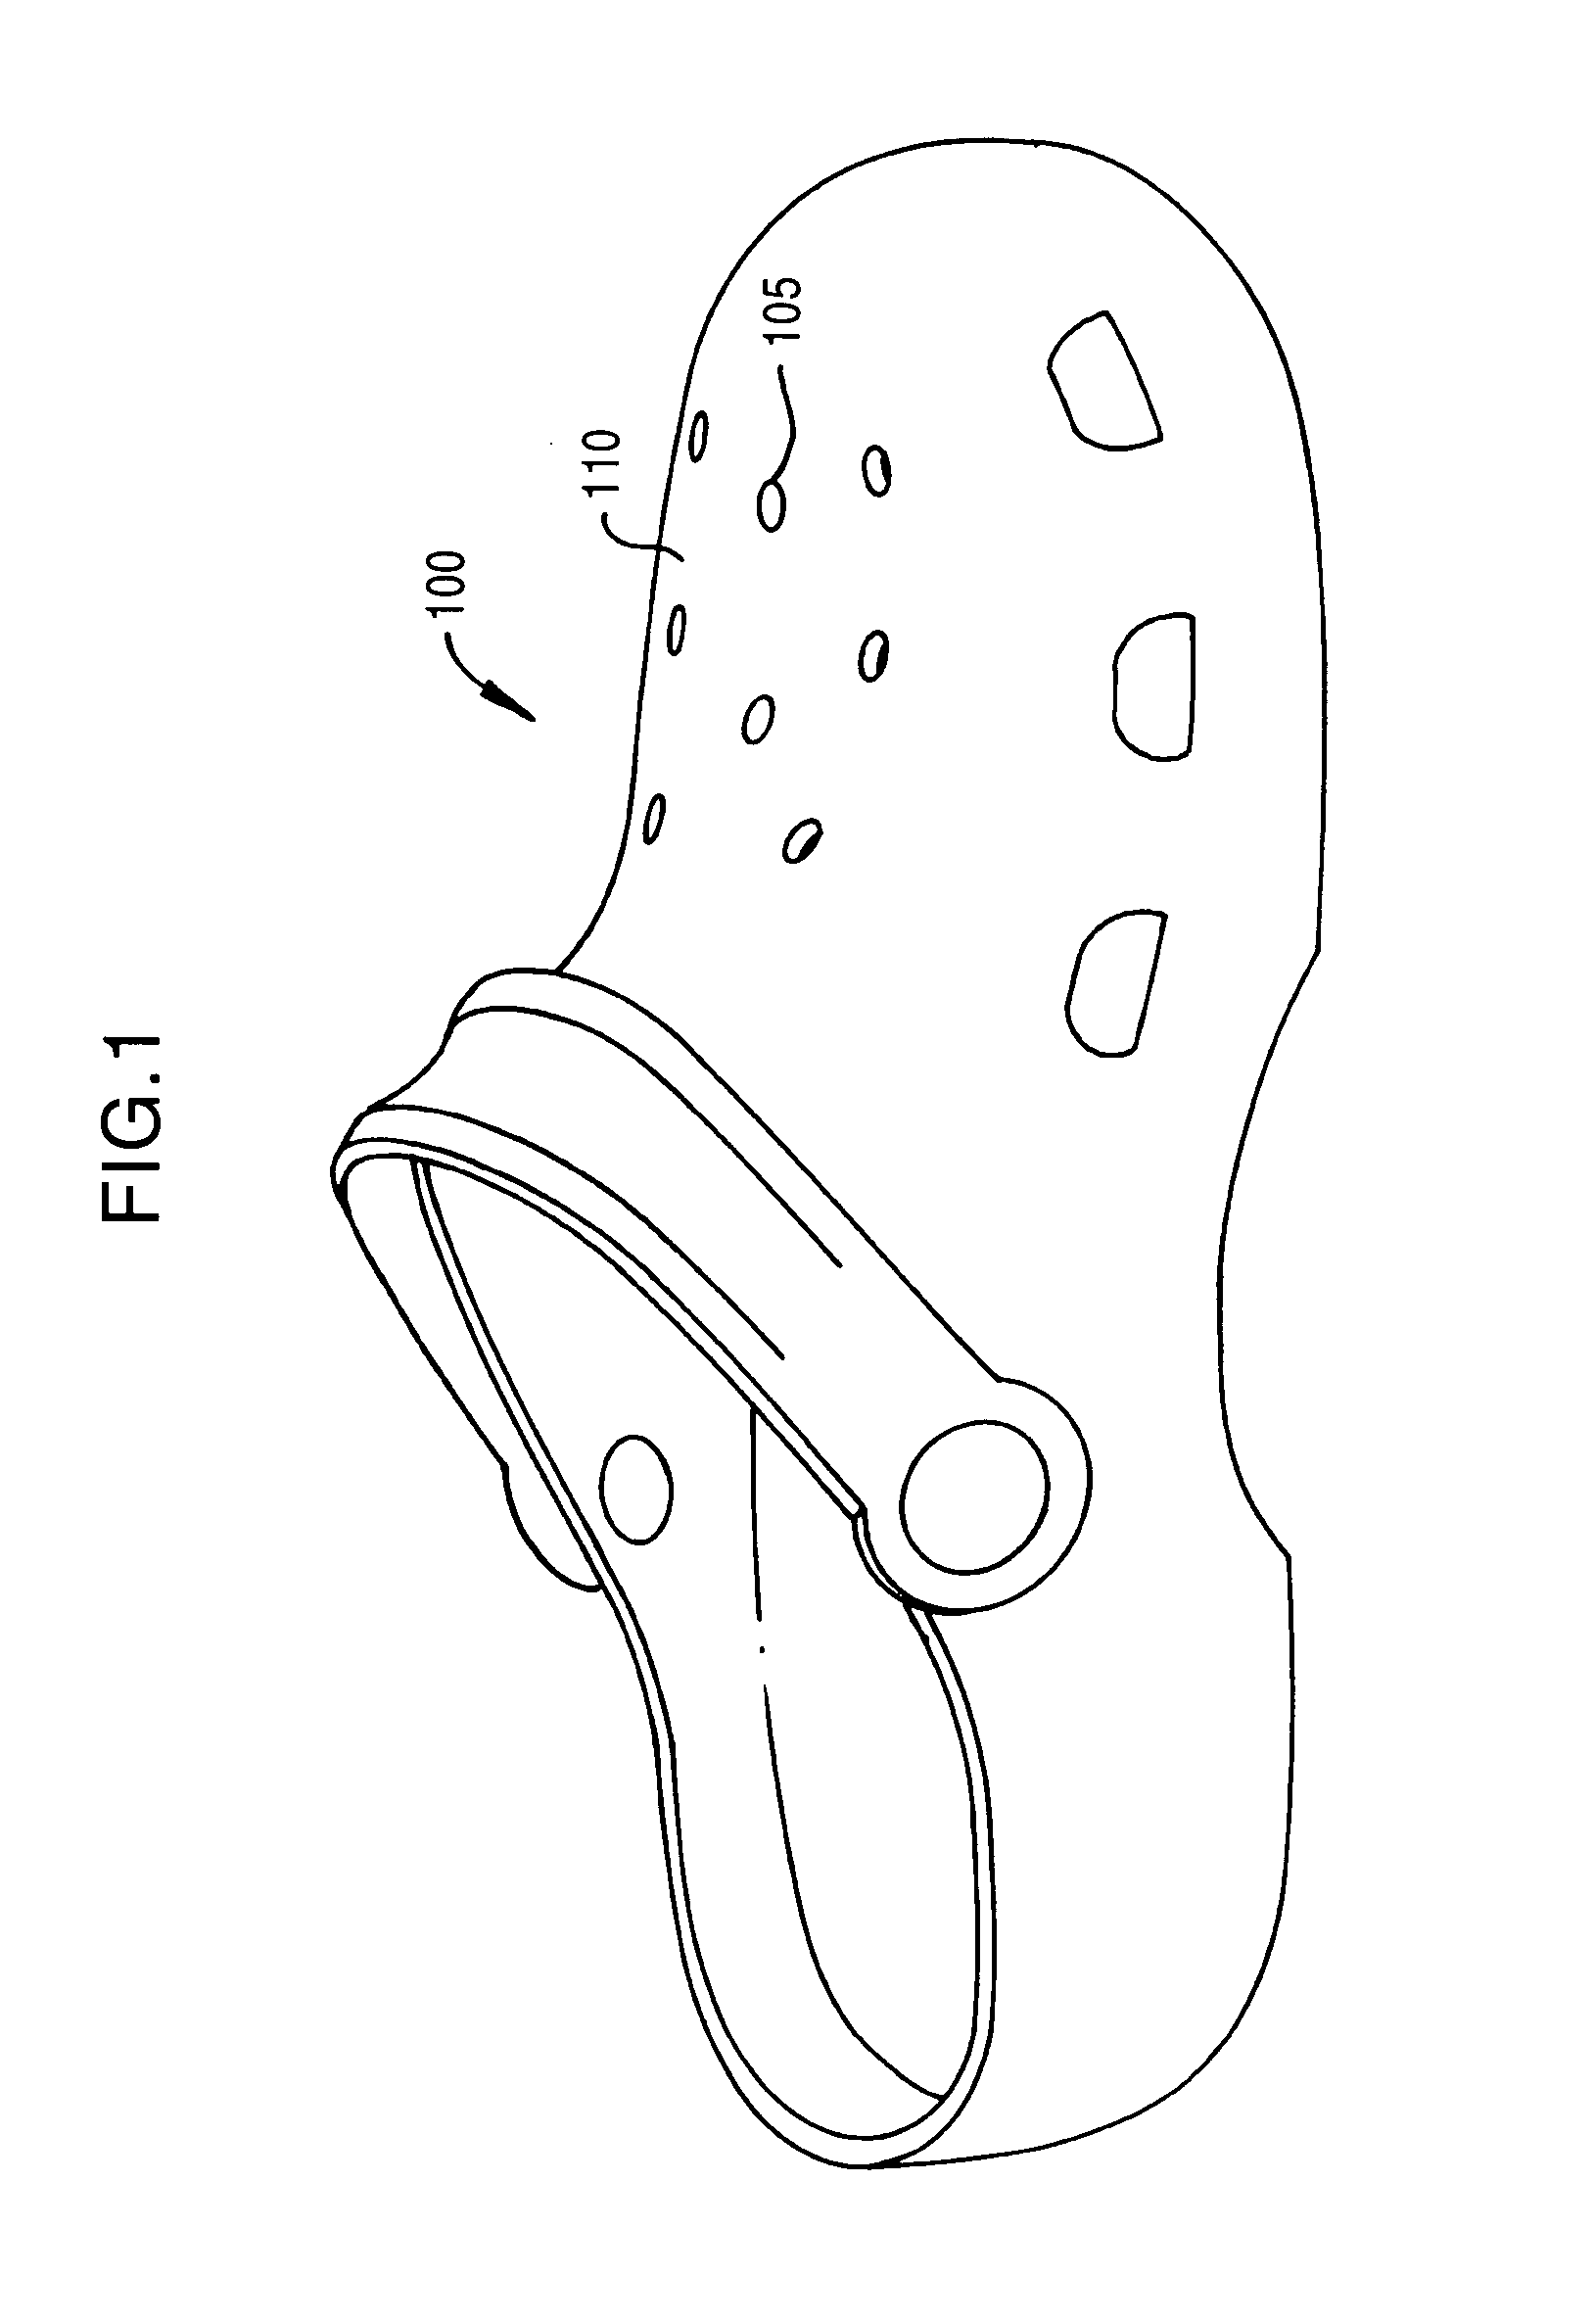 System and method for securing accessories to clothing